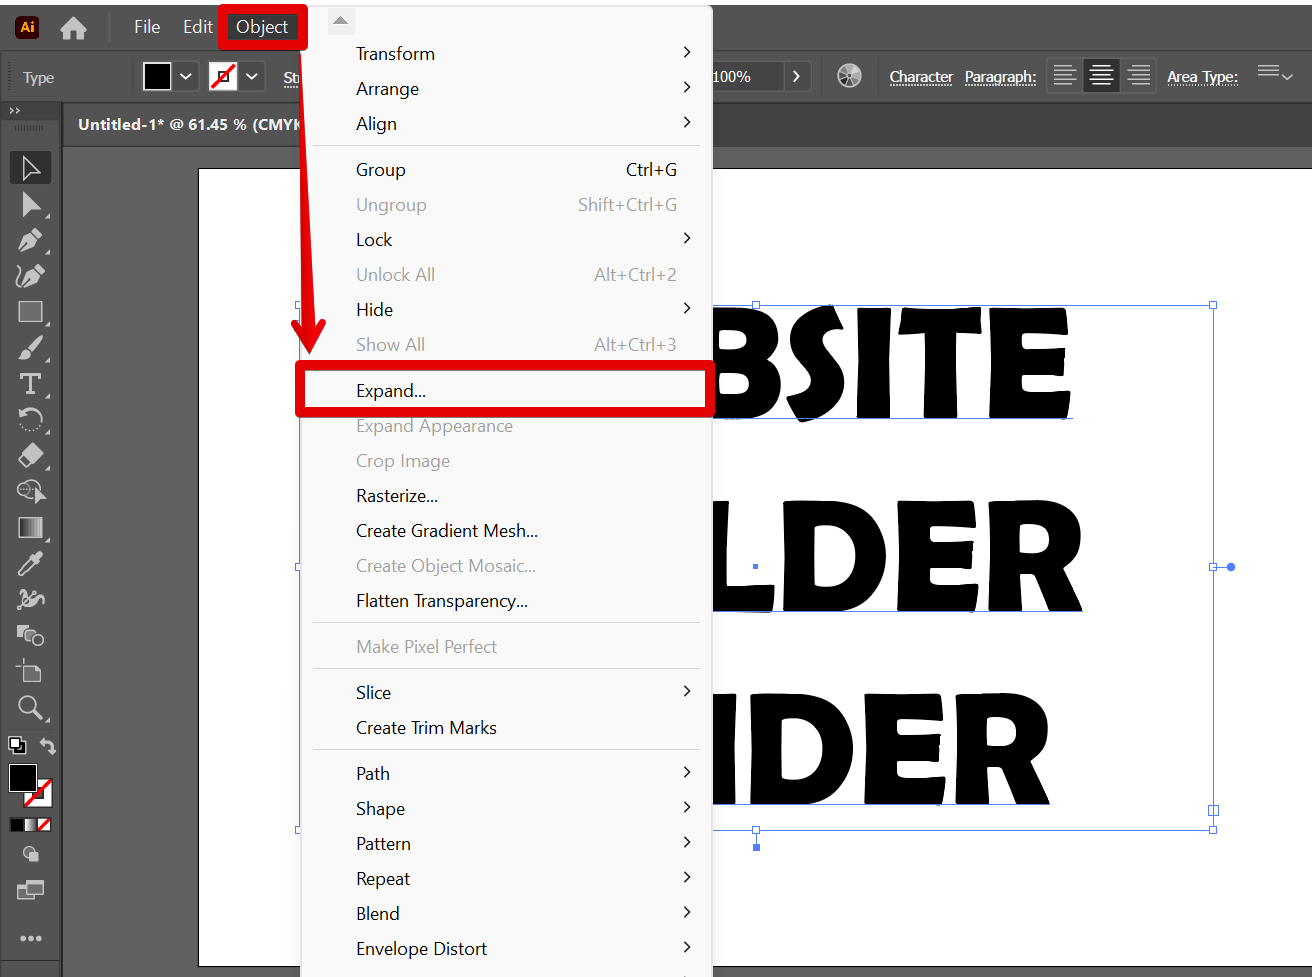 How to Vectorize an Image in Illustrator